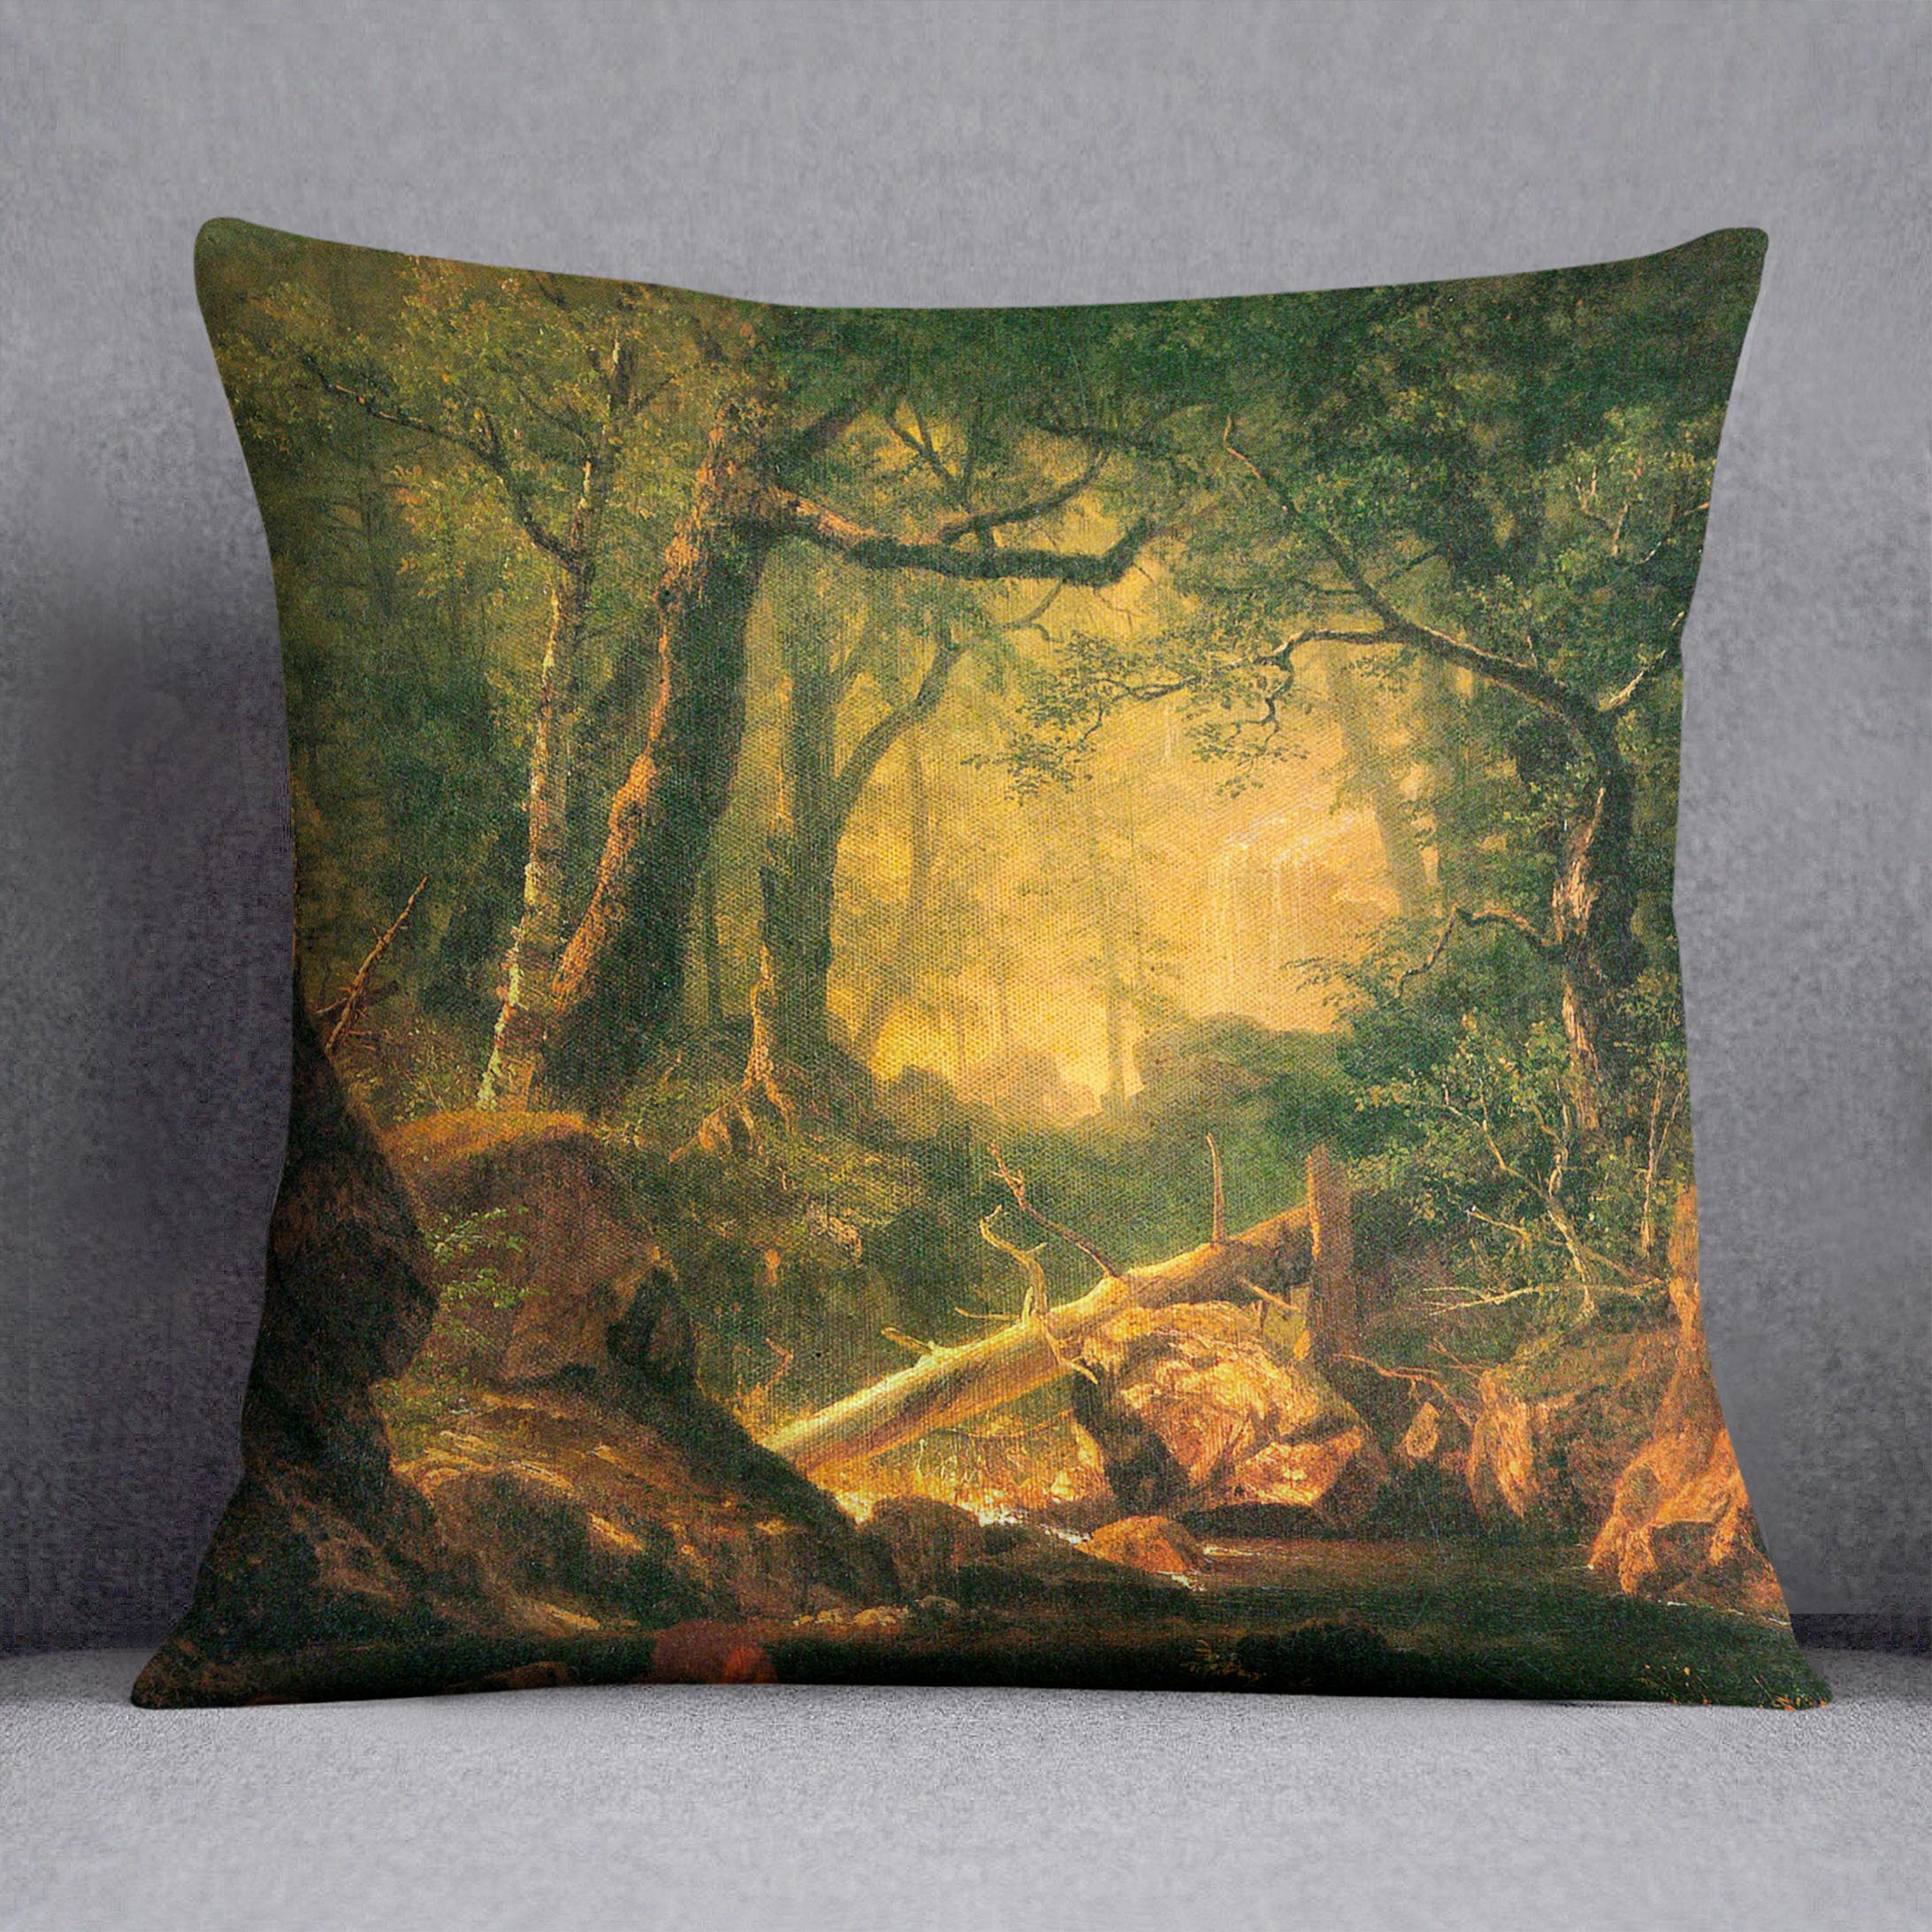 White Mountains New Hampshire 2 by Bierstadt Cushion - Canvas Art Rocks - 1